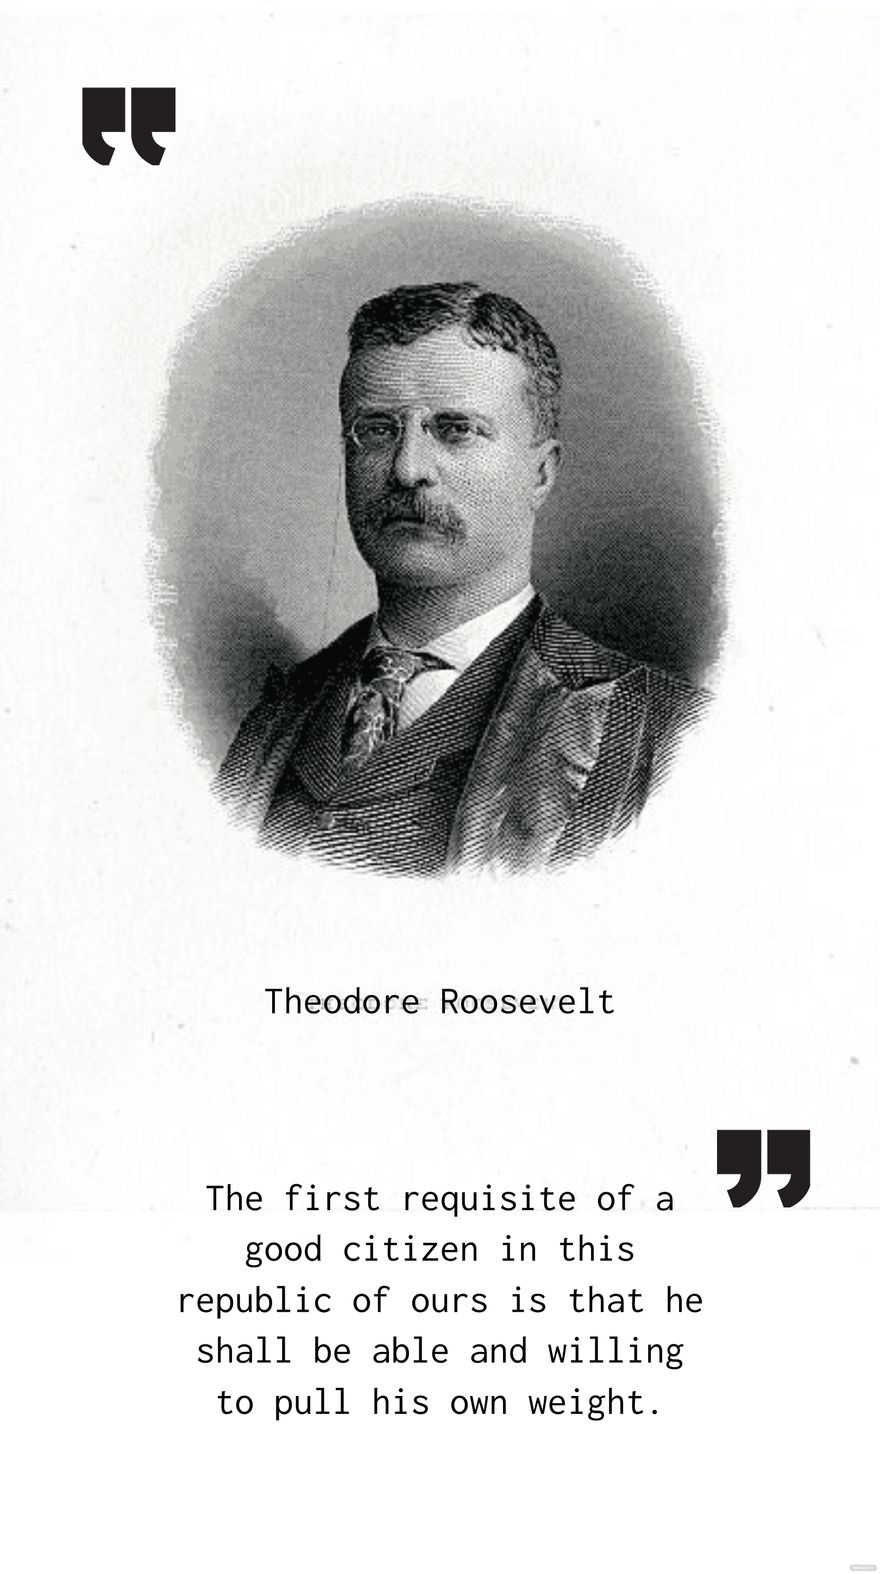 The first requisite of a good citizen in this republic of ours is that he shall be able and willing to pull his own weight. - Theodore Roosevelt in JPEG